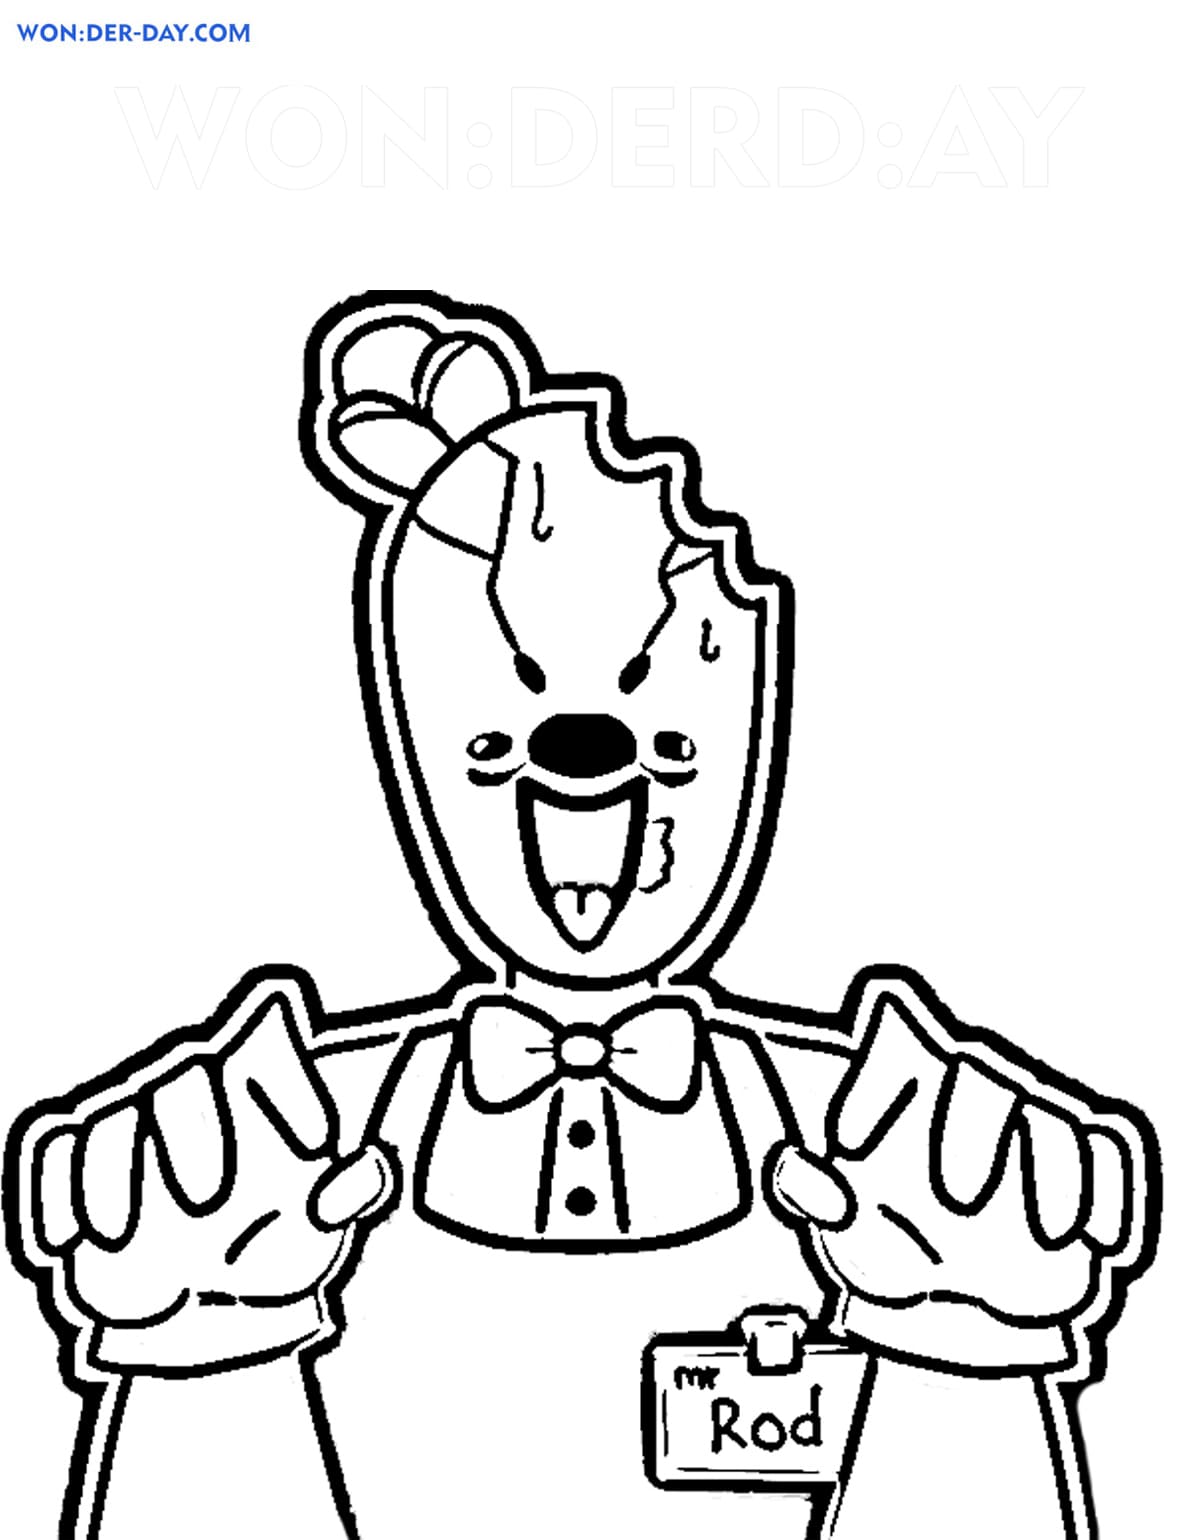 Download Rod Ice Scream coloring pages - Free Printable coloring pages